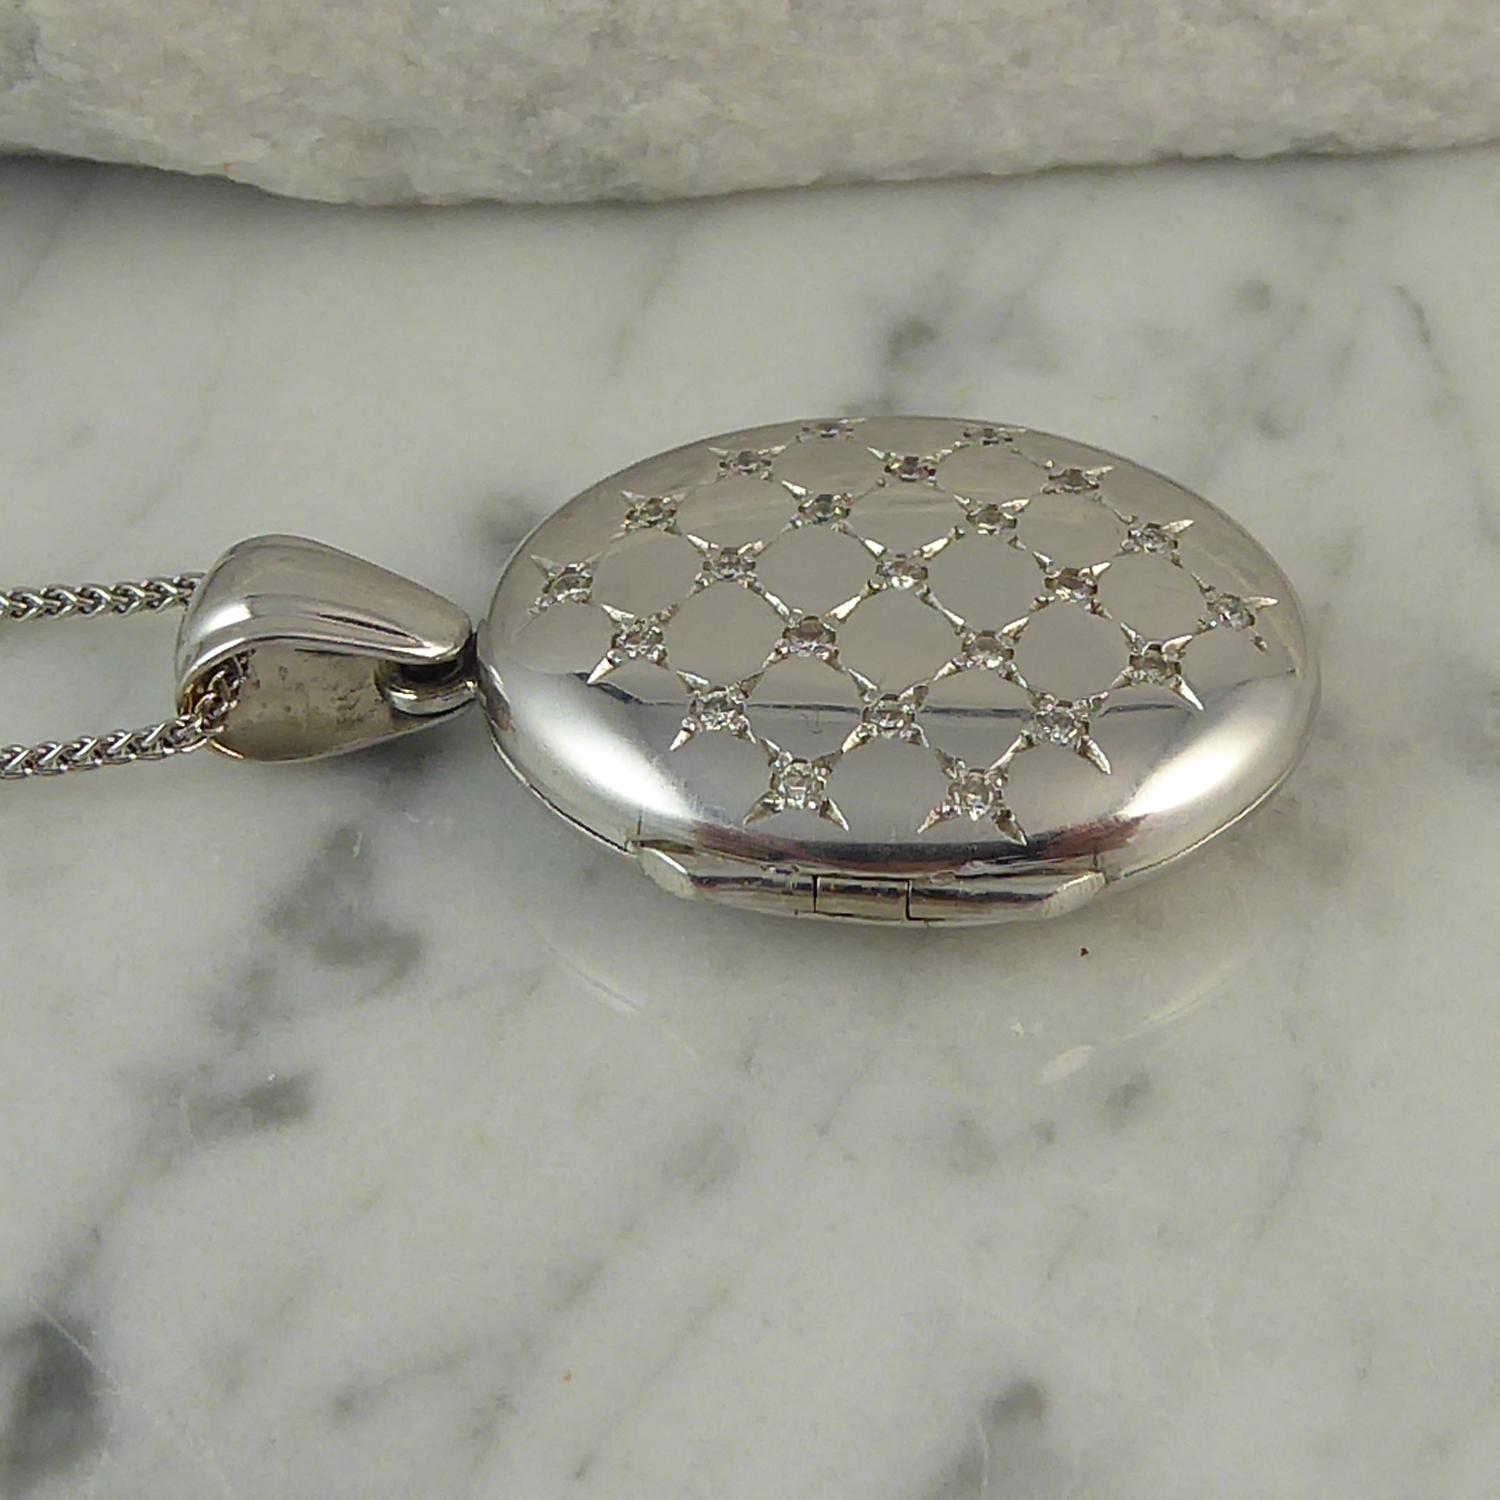 Hand made in the UK by renowned manufacturer, Charles Green, who were established in 1824 and are now into their sixth generation.  The locket has been created in 18ct white gold and features to the front a quilted pattern studded with a diamond at